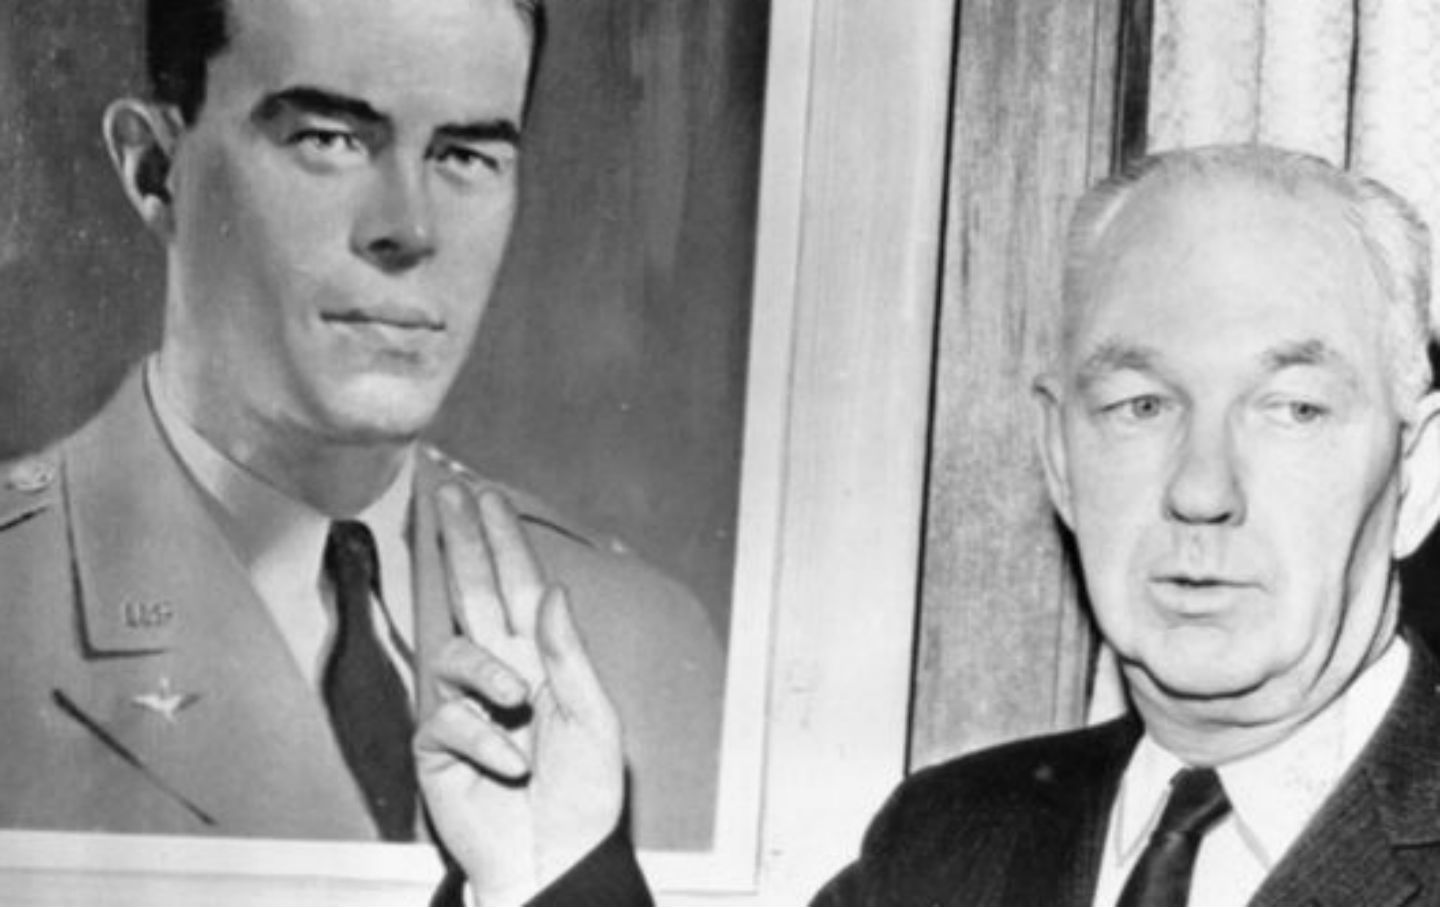 December 9, 1958: The John Birch Society Is Founded